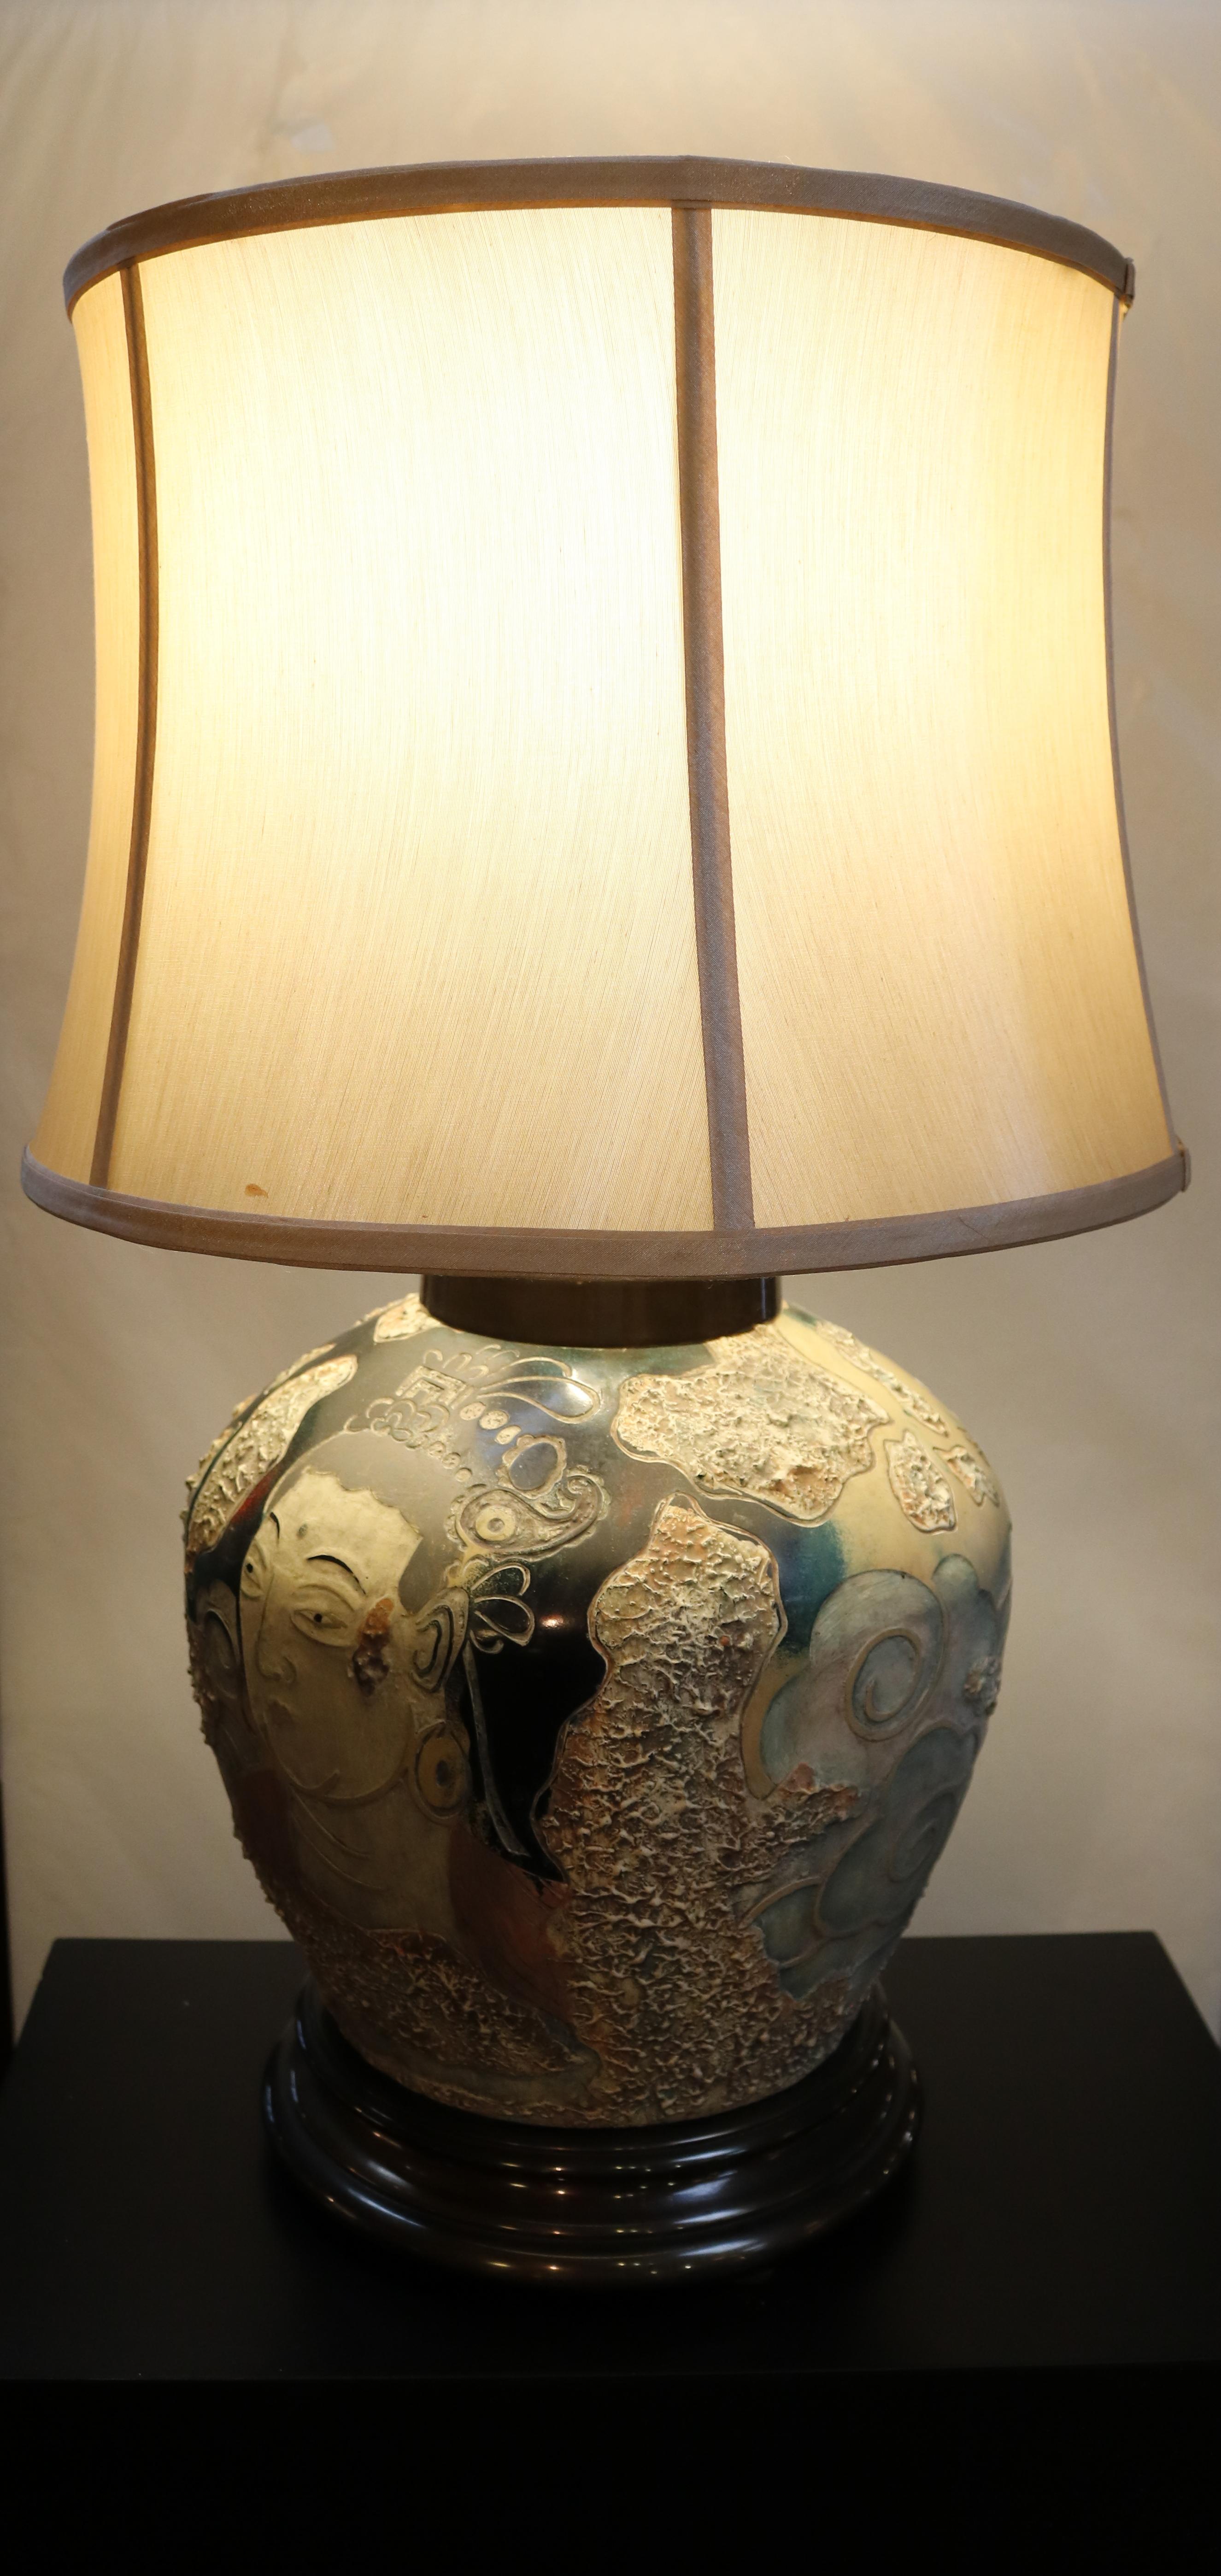 American Asian-Influence Lamp by Frederick Cooper